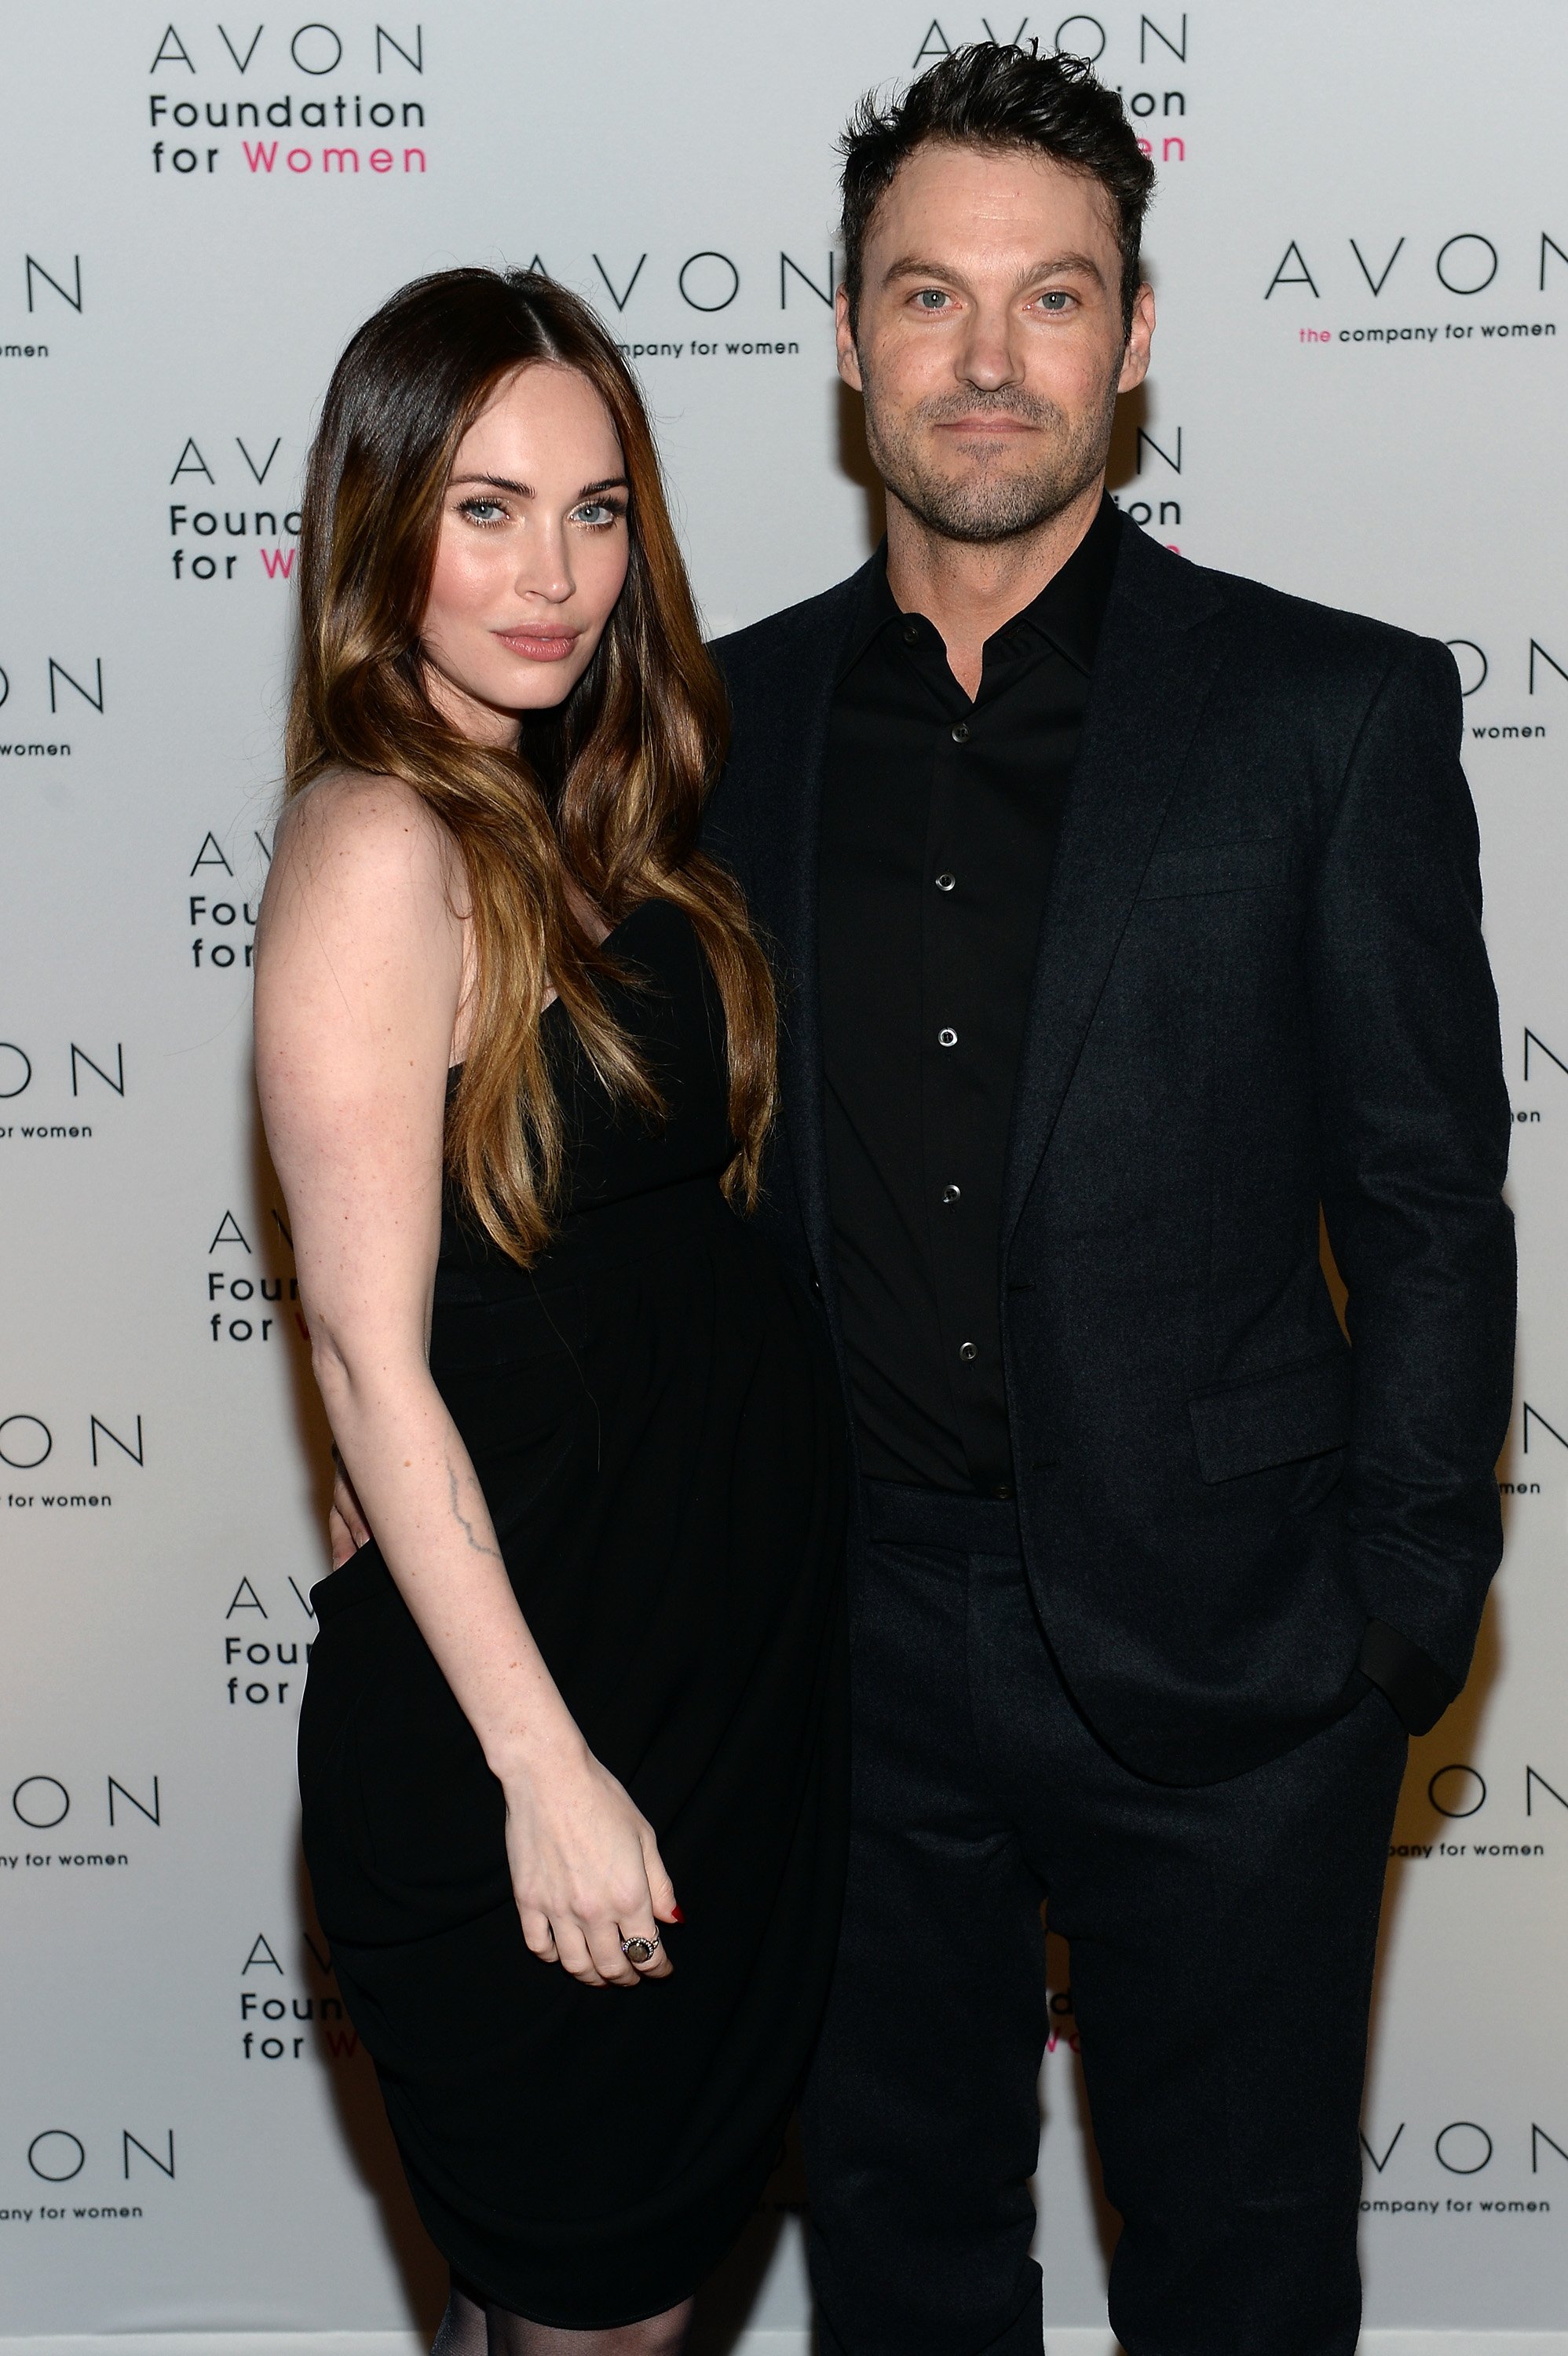 Megan Fox and Brian Austin Green during a 2013 launching event in New York City.